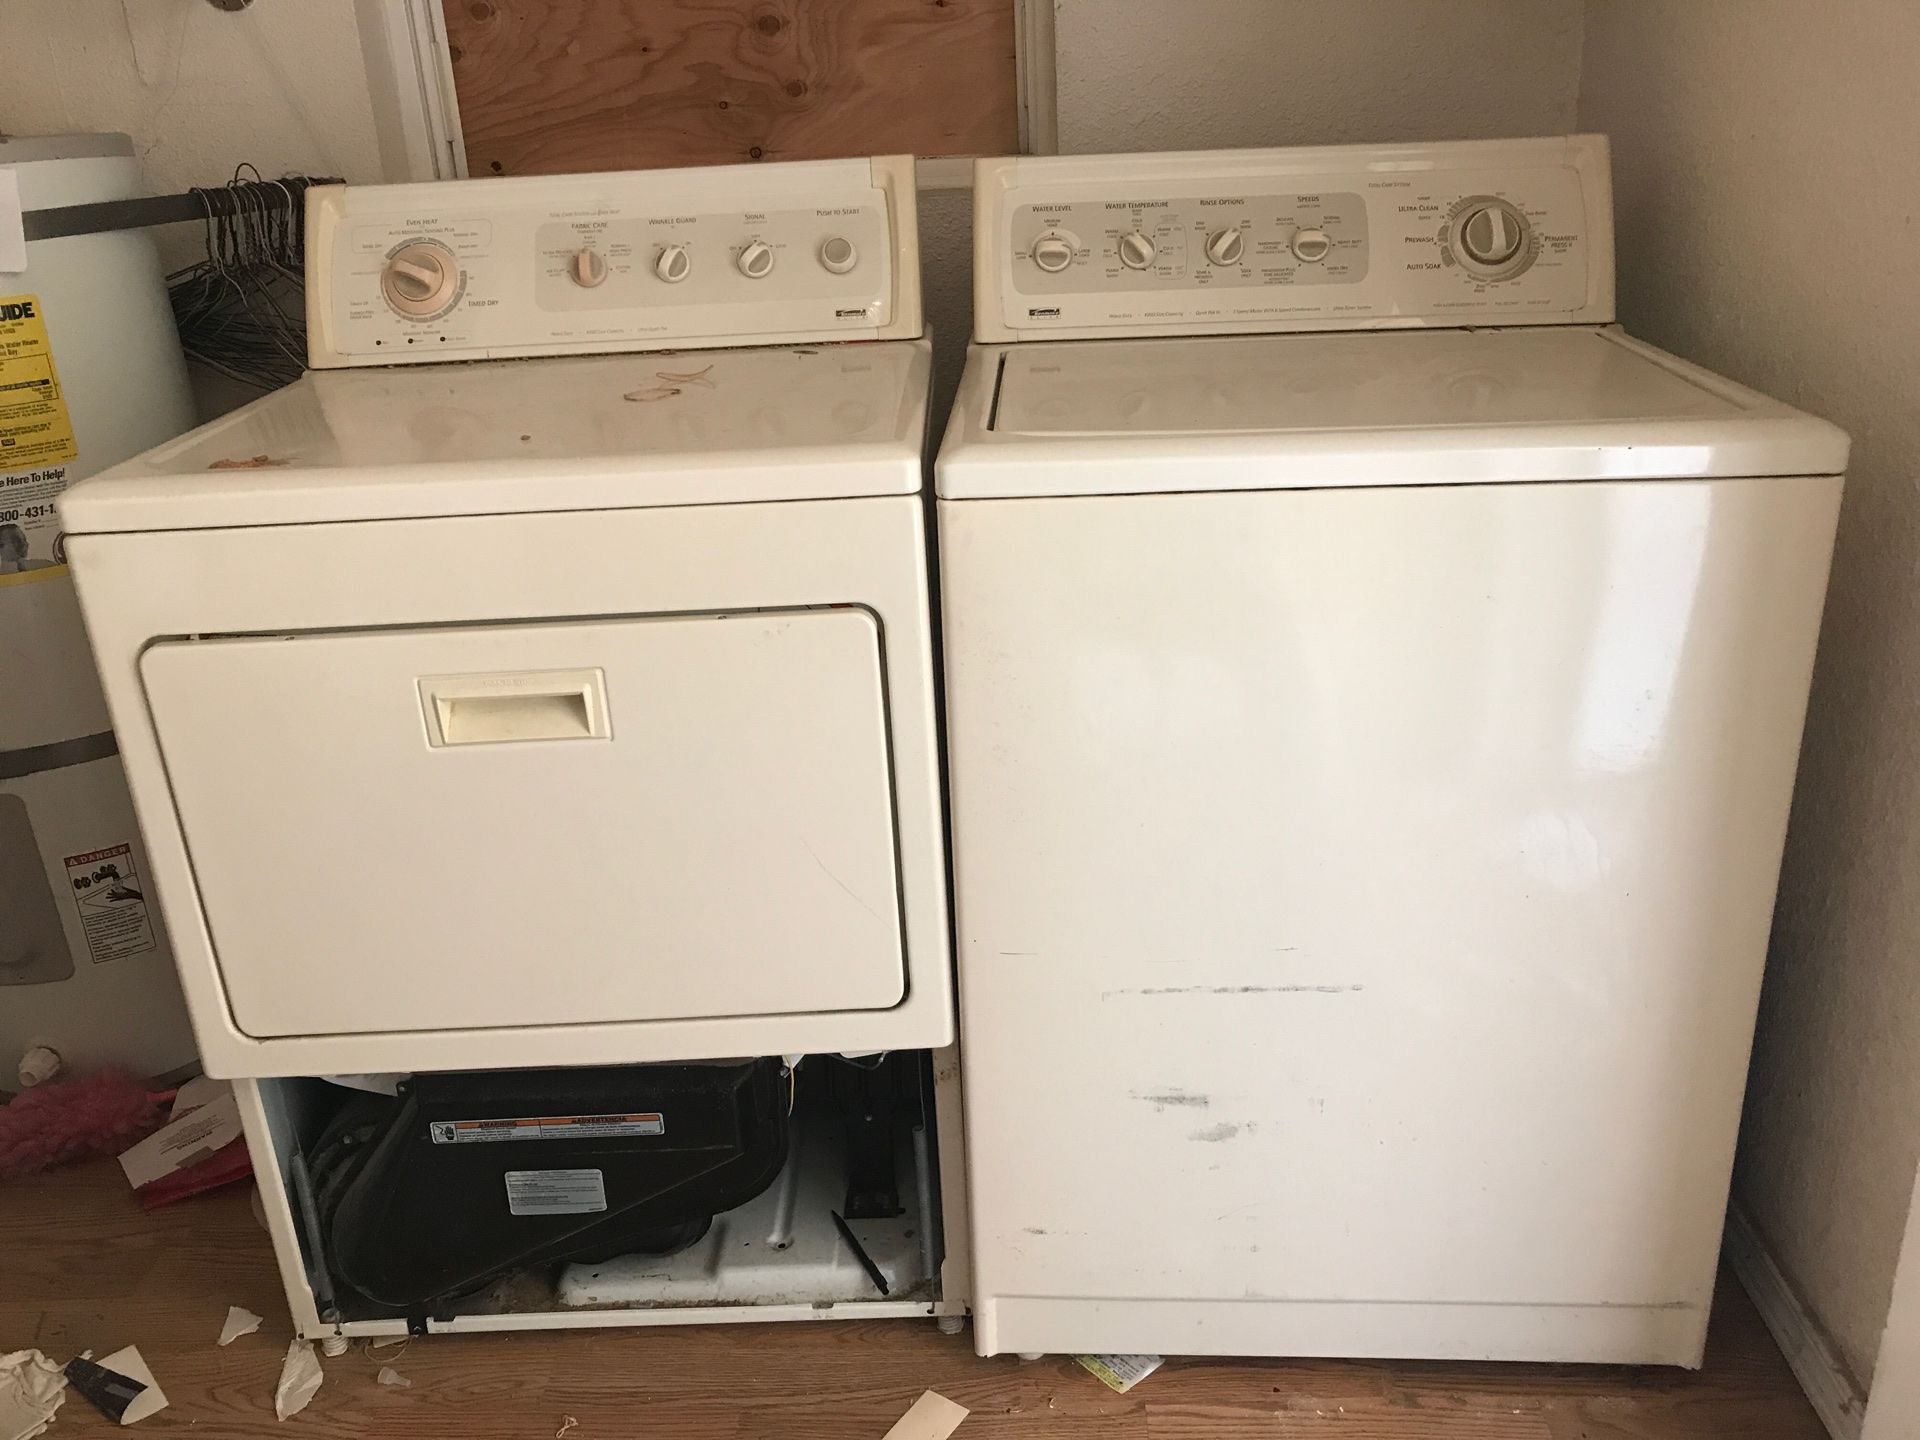 Kenmore elite washer and dryer set